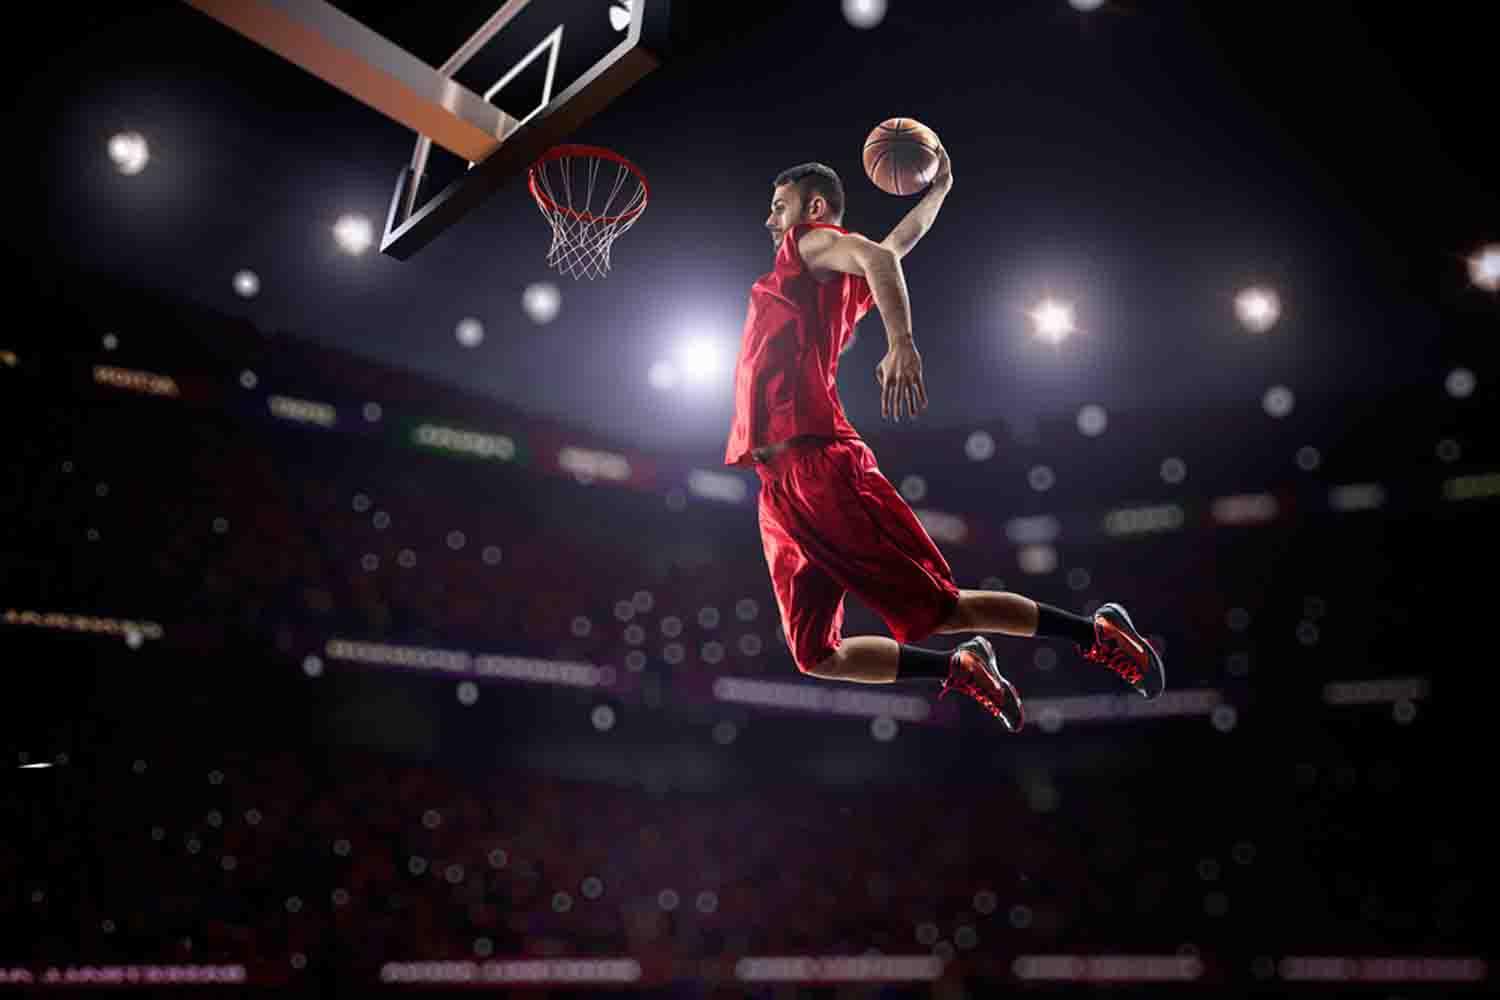 Basketball Wallpaper APK Download - Free Personalization APP for